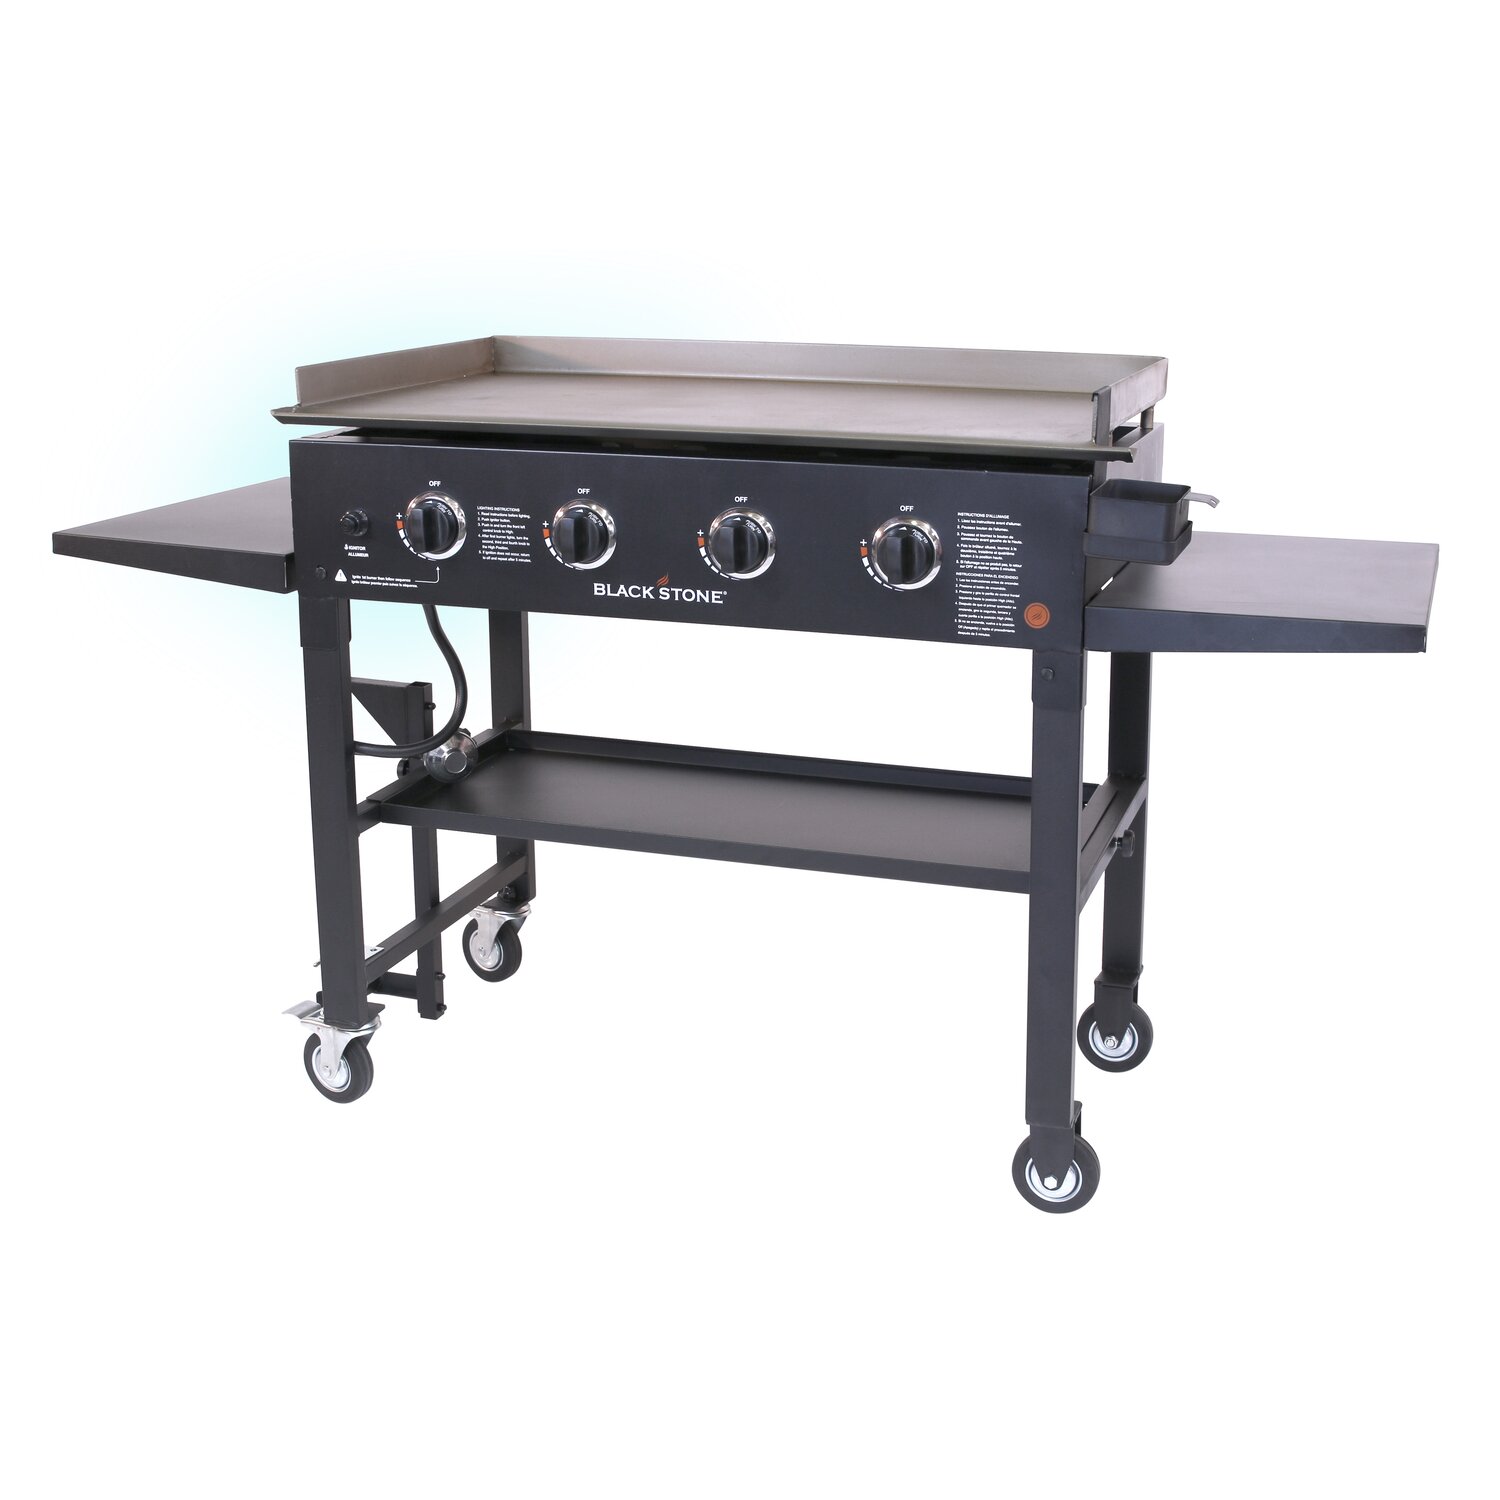 Blackstone-36-Griddle-Gas-Grill-Cooking-Station-1554.jpg